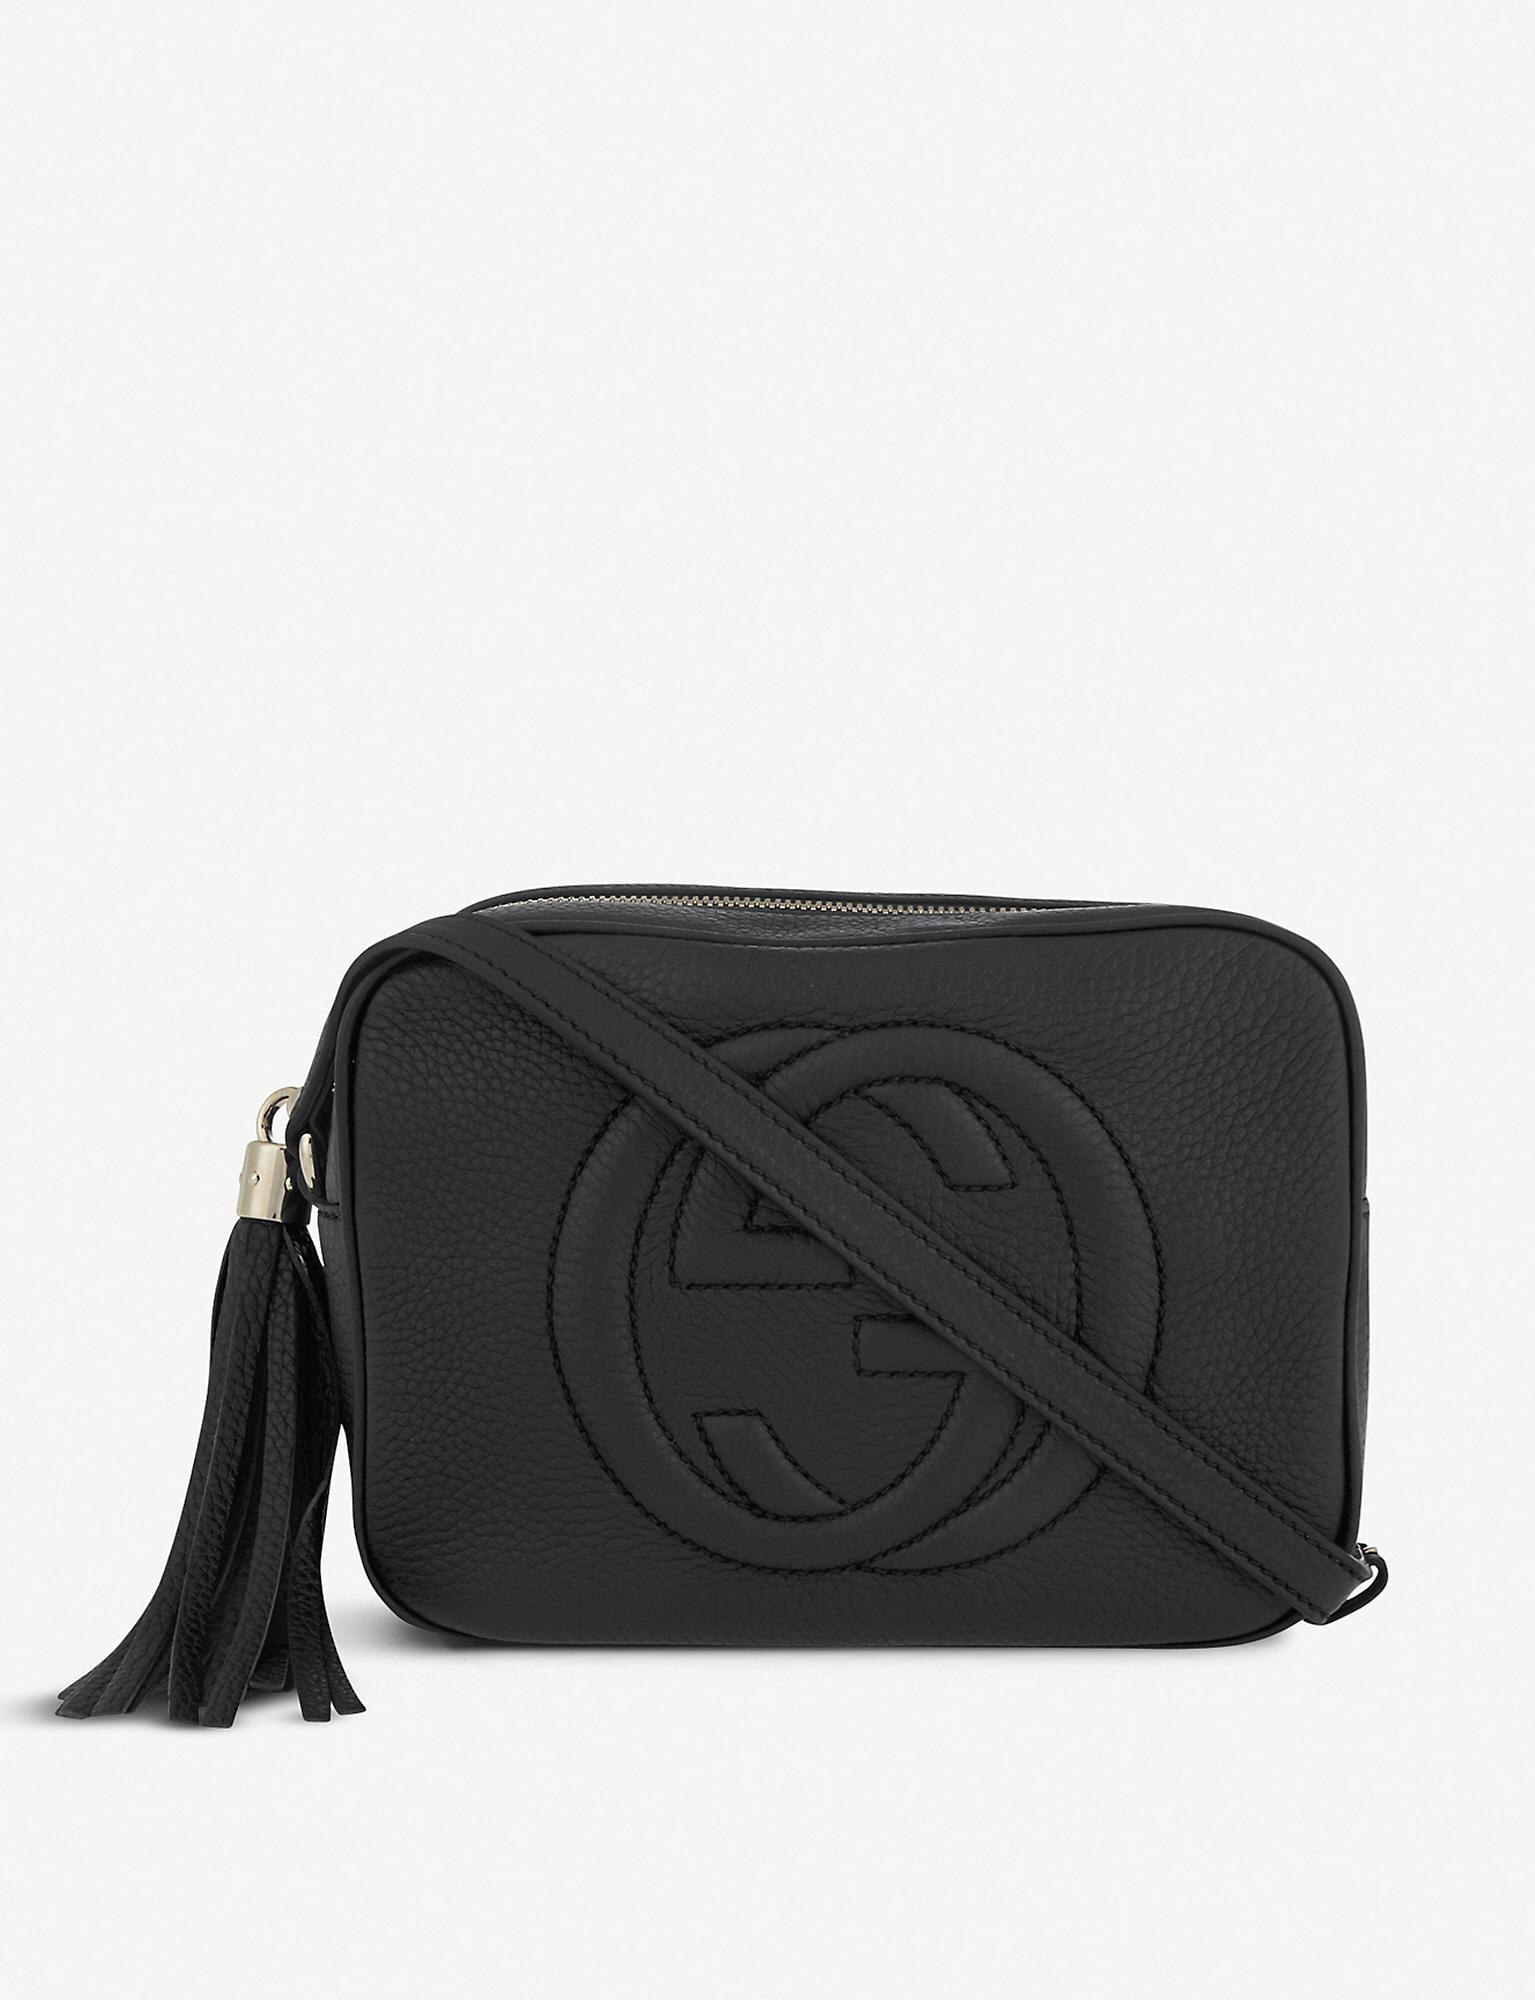 Gucci Soho Leather Cross-Body Bag in Nero (Black) - Save 19% - Lyst